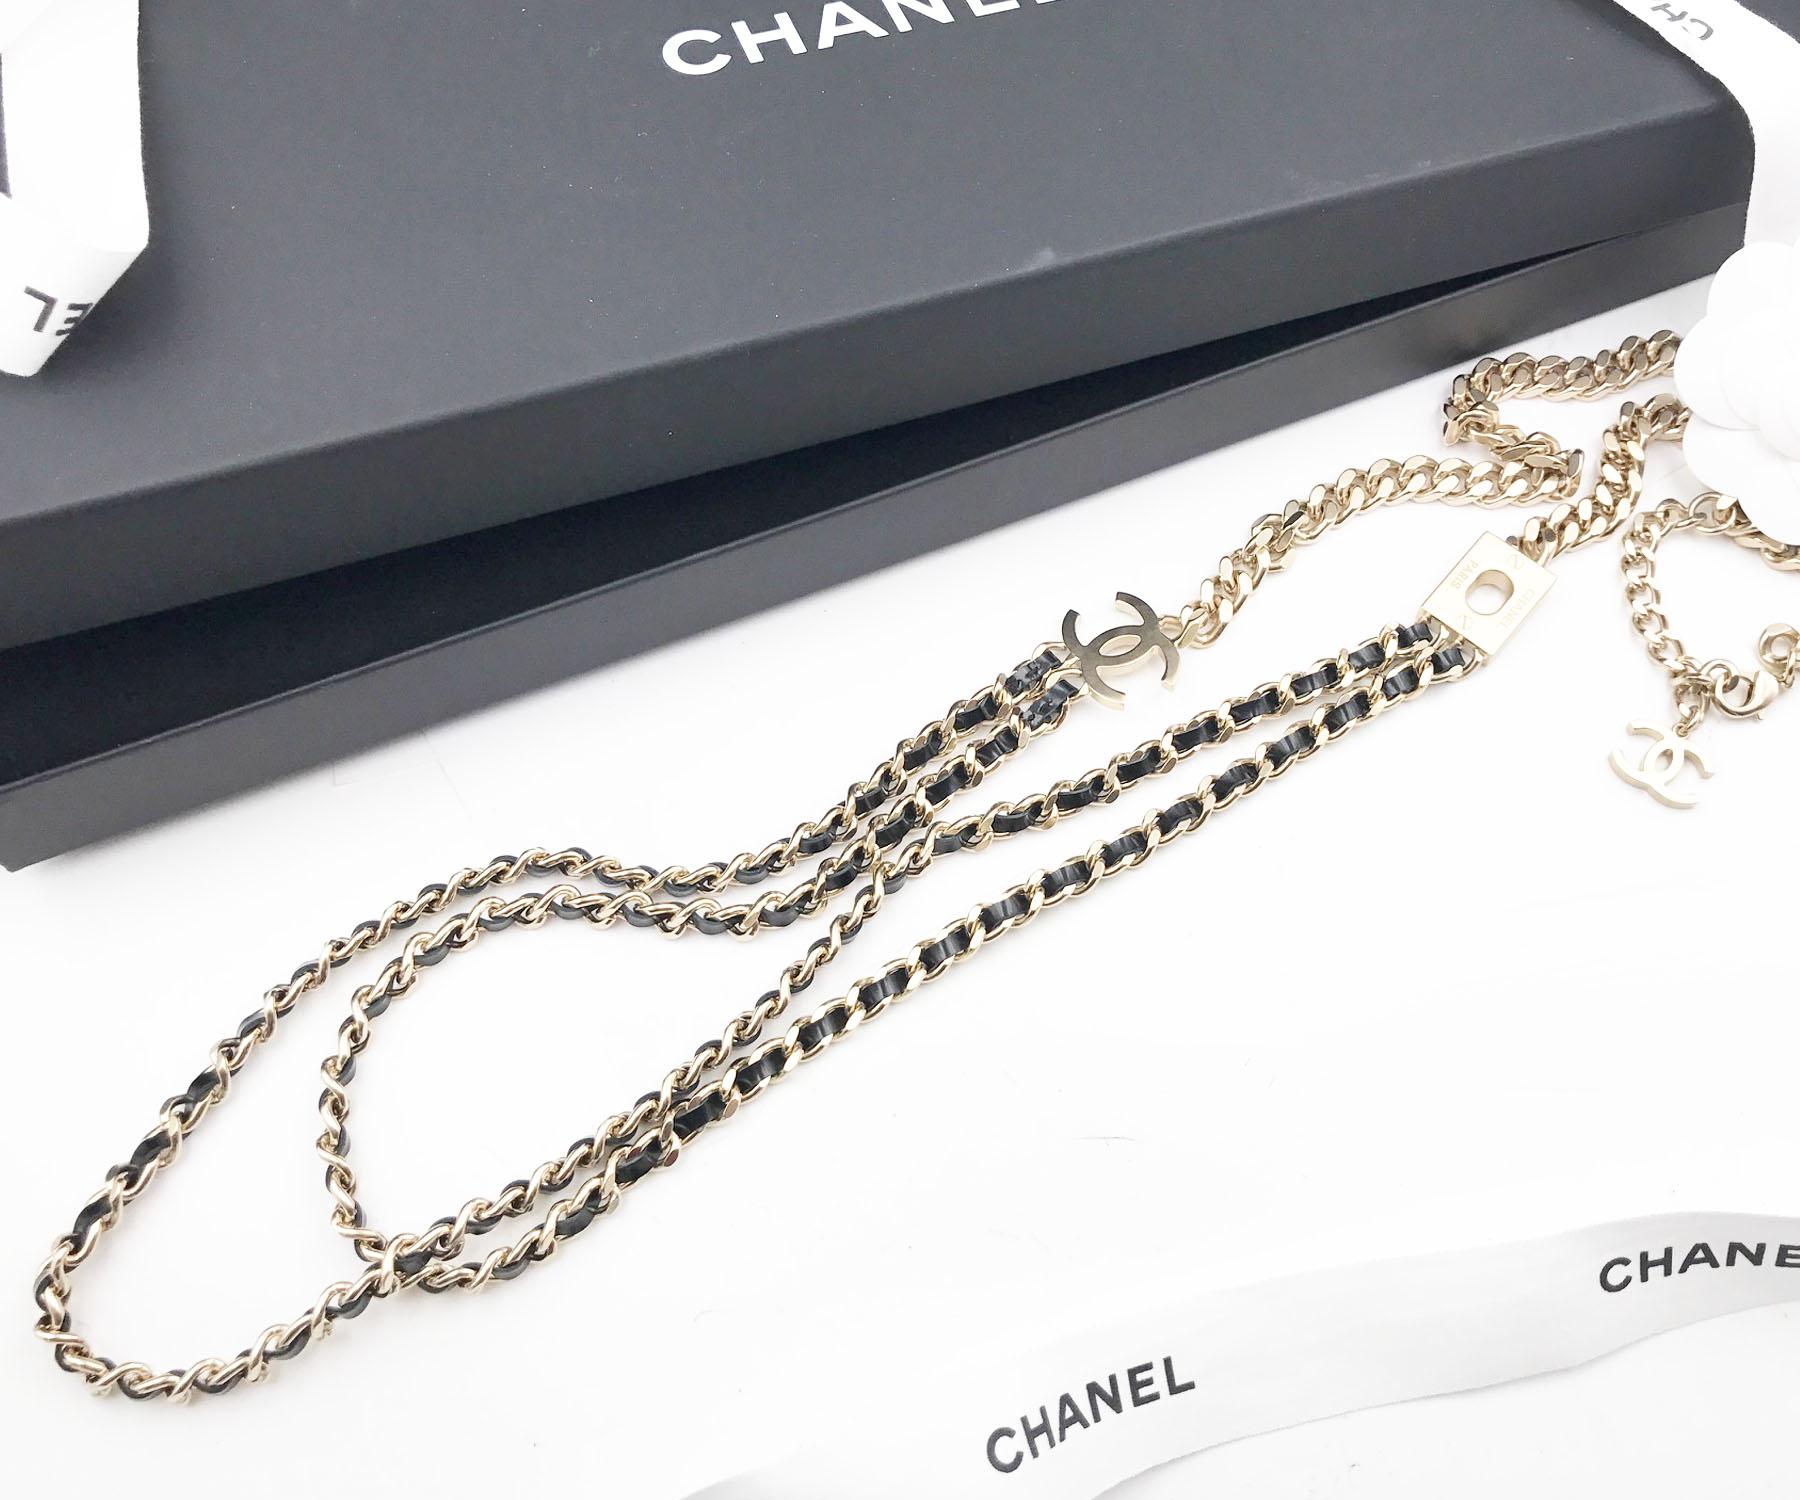 Chanel Brand New Gold Chain Leather Long Necklace + Removable Gold Camellia Brooch Set

*Marked 17
*Made in Italy
*Comes with original boxes, pouches, ribbons and camellia flower
*Brand New and it is for 2 items as a set

-The necklace is